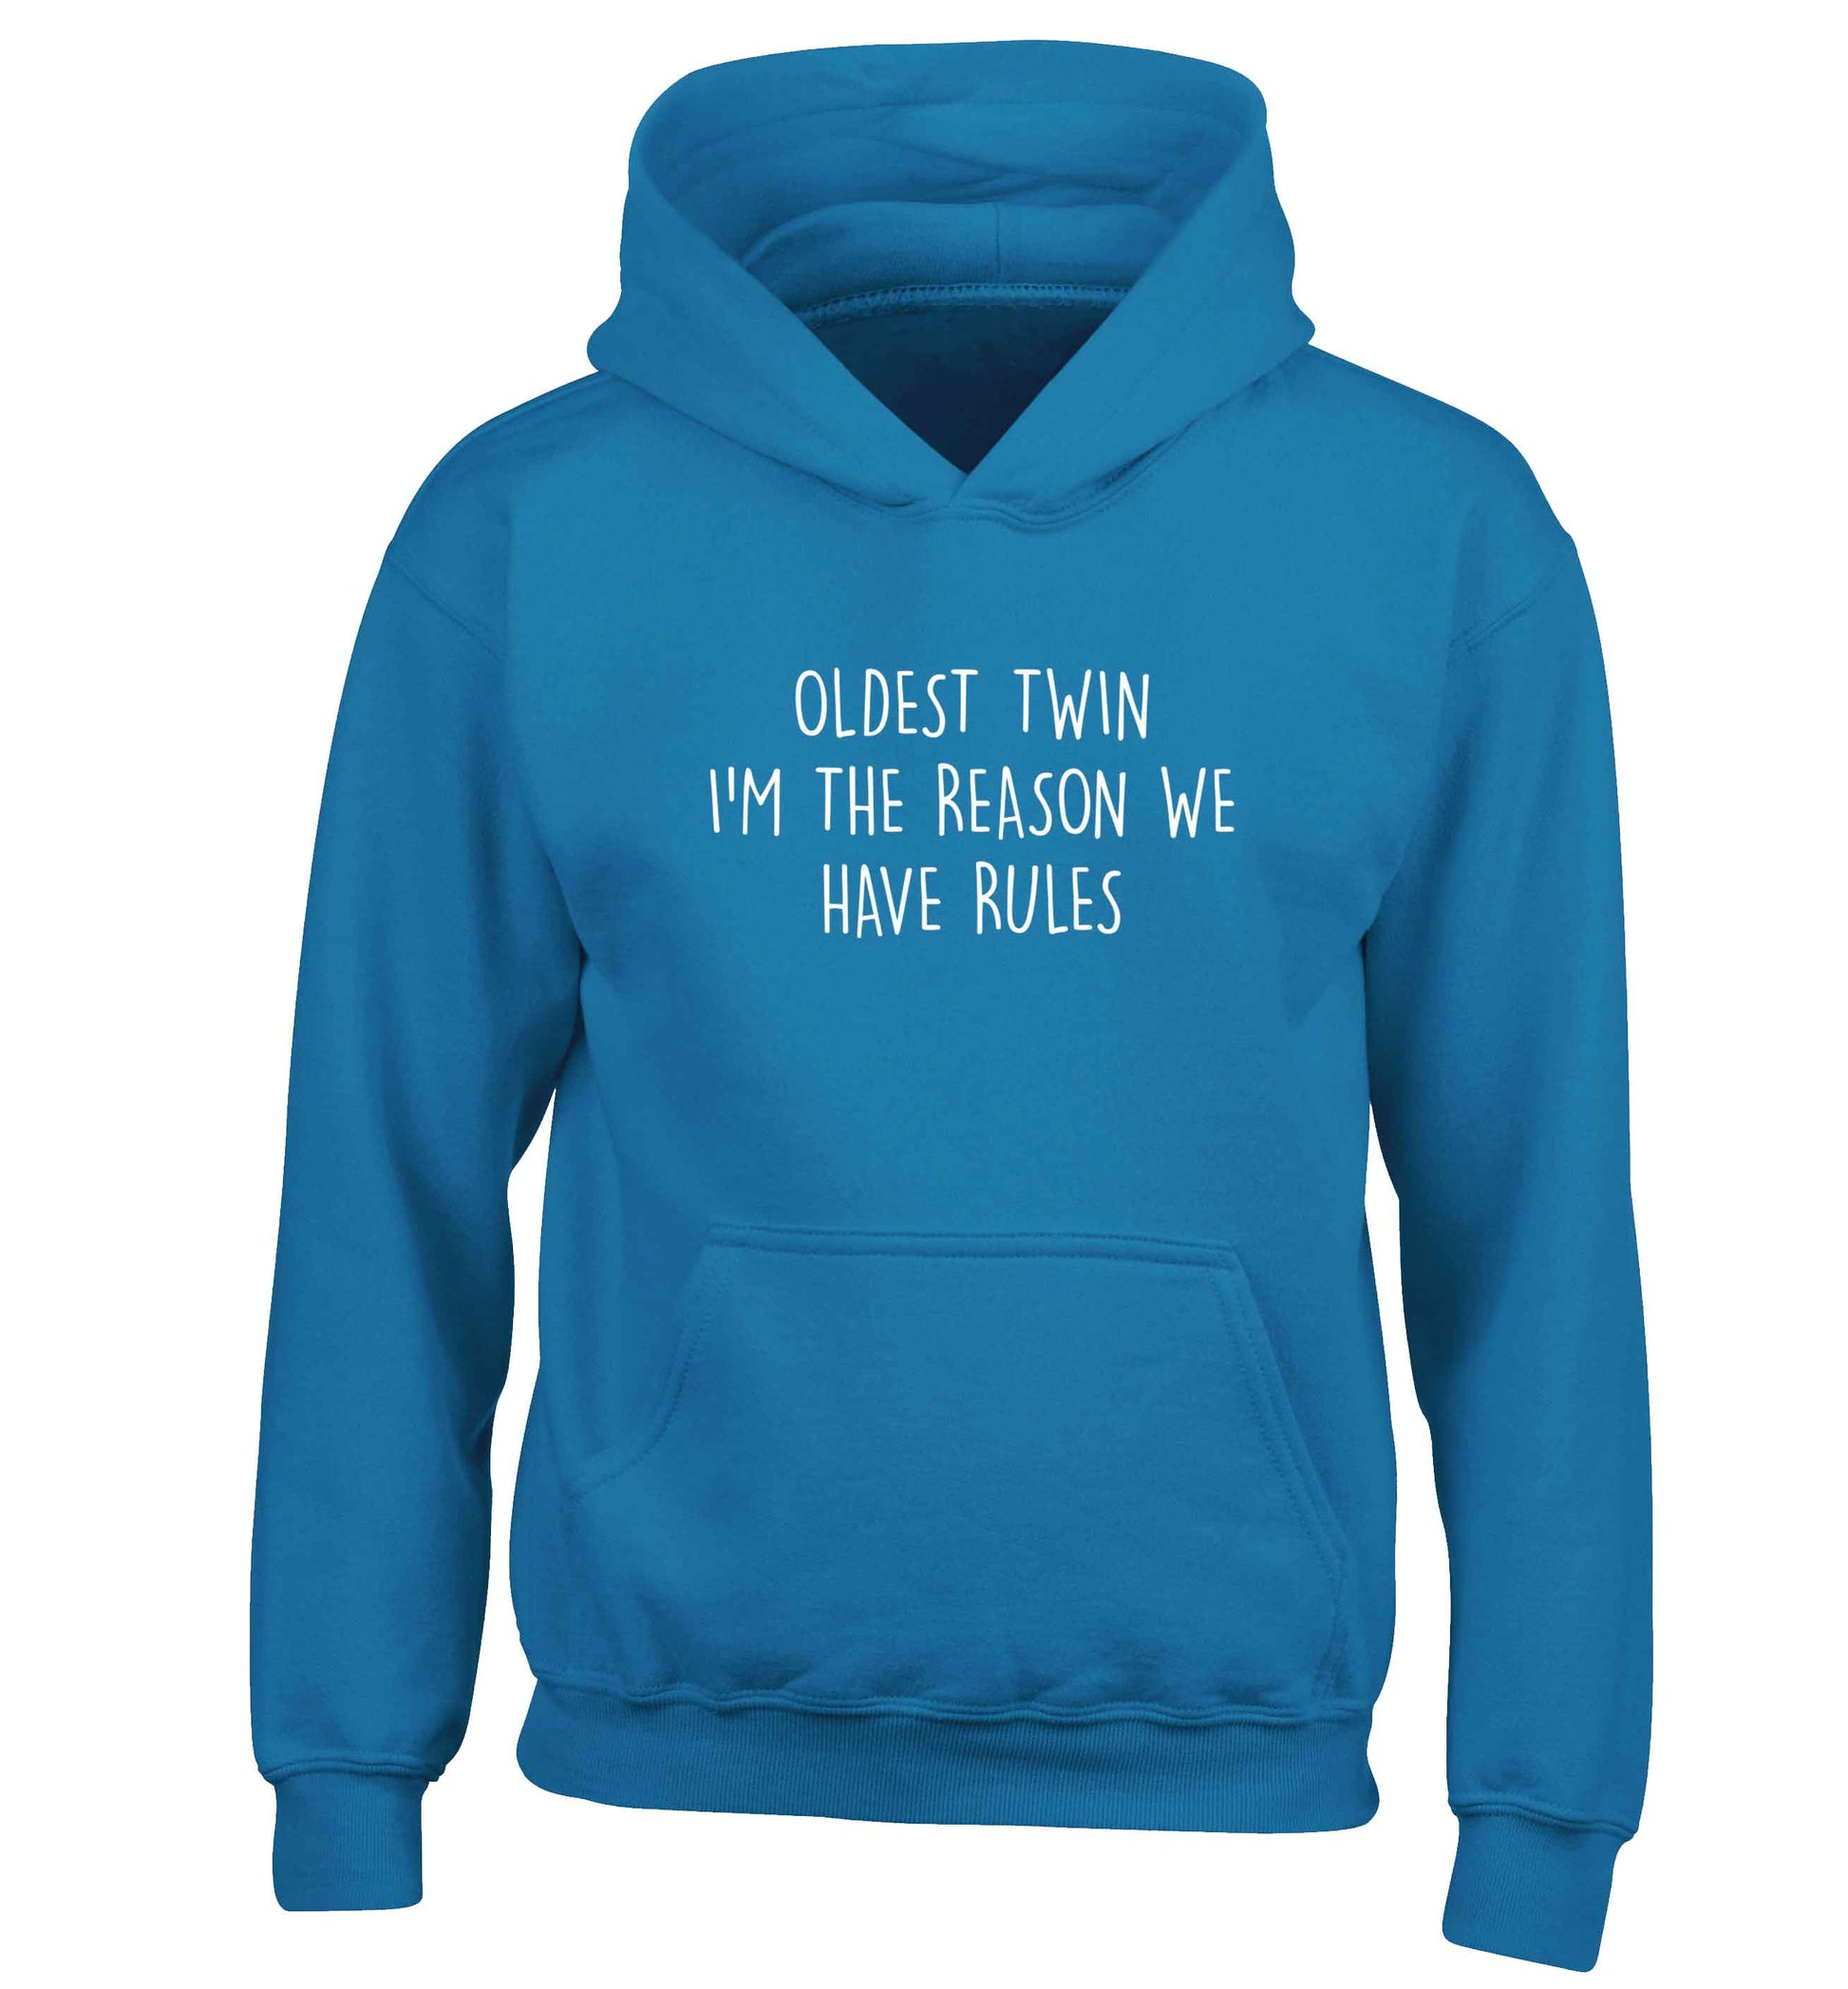 Oldest twin I'm the reason we have rules children's blue hoodie 12-13 Years